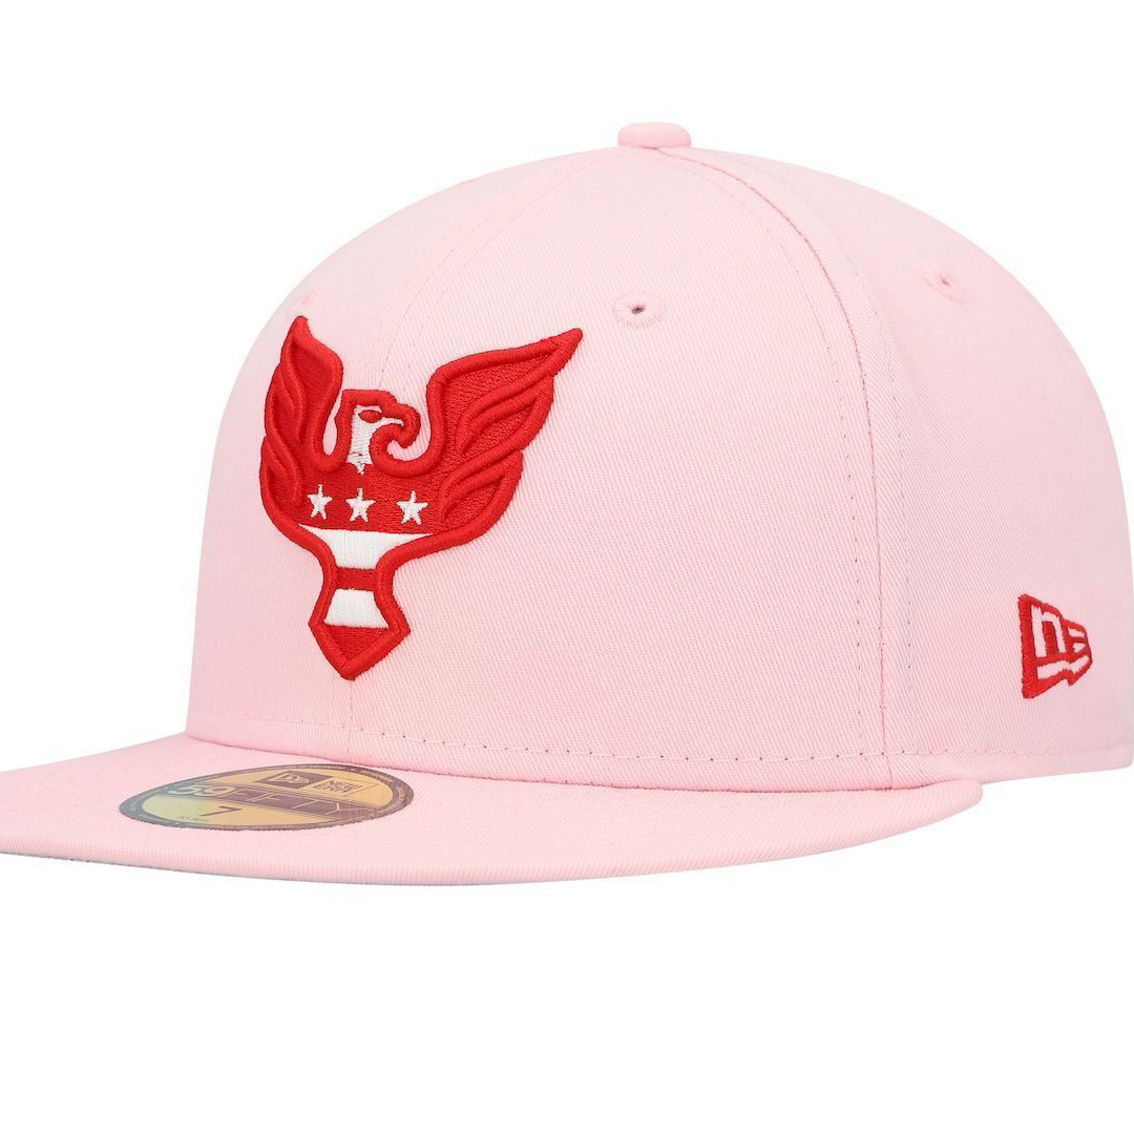 Men's New Era Pink D.C. United Pastel Pack 59FIFTY Fitted Hat - Image 2 of 4